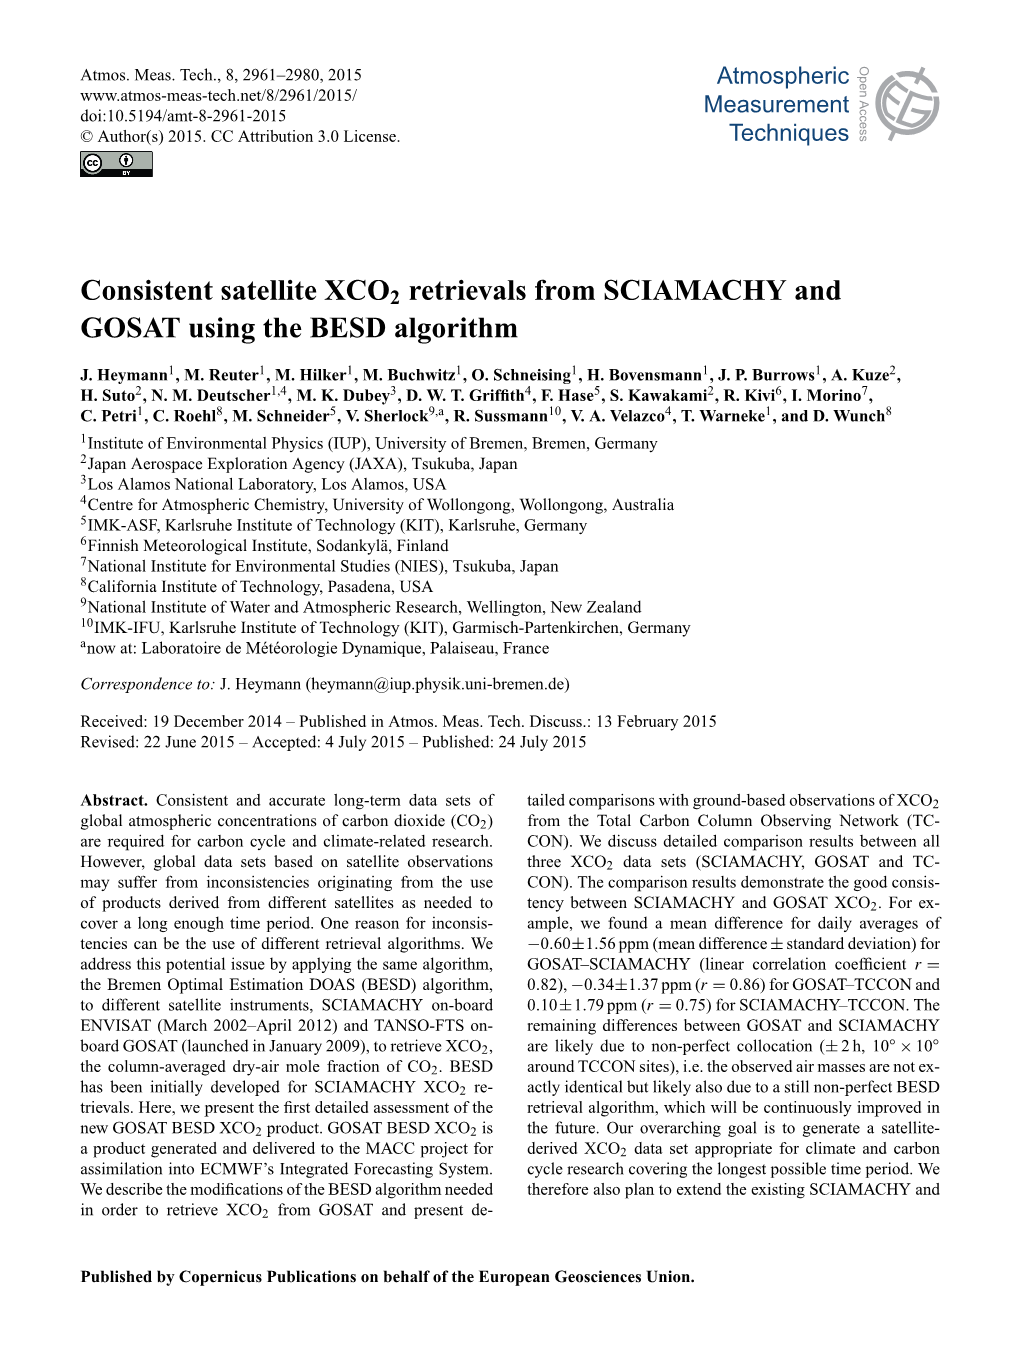 Consistent Satellite XCO2 Retrievals from SCIAMACHY and GOSAT Using the BESD Algorithm